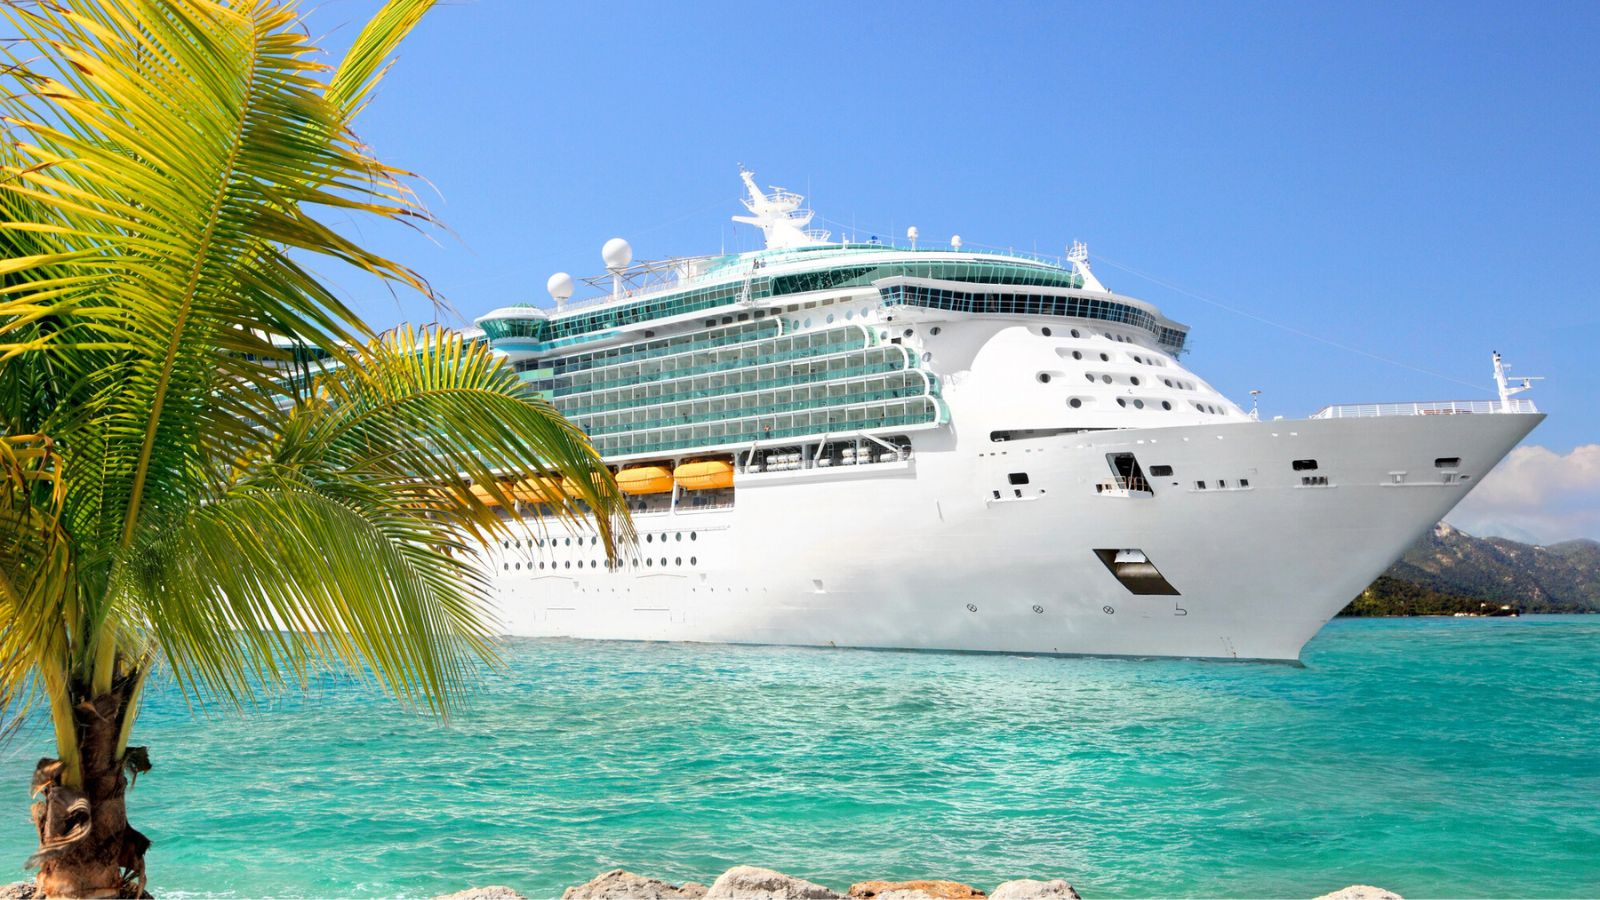 <p>The thought of going away for less time is unlikely to appeal! But it’s undoubtedly an effective way to save money on a cruise.</p><p>Longer cruises are always more expensive. So, if price is paramount, keep shorter ones in mind. You’ll find some killer deals, which might mean you can afford to go to the place you wanted, on the ship you wanted, and in your first-choice cabin.</p>